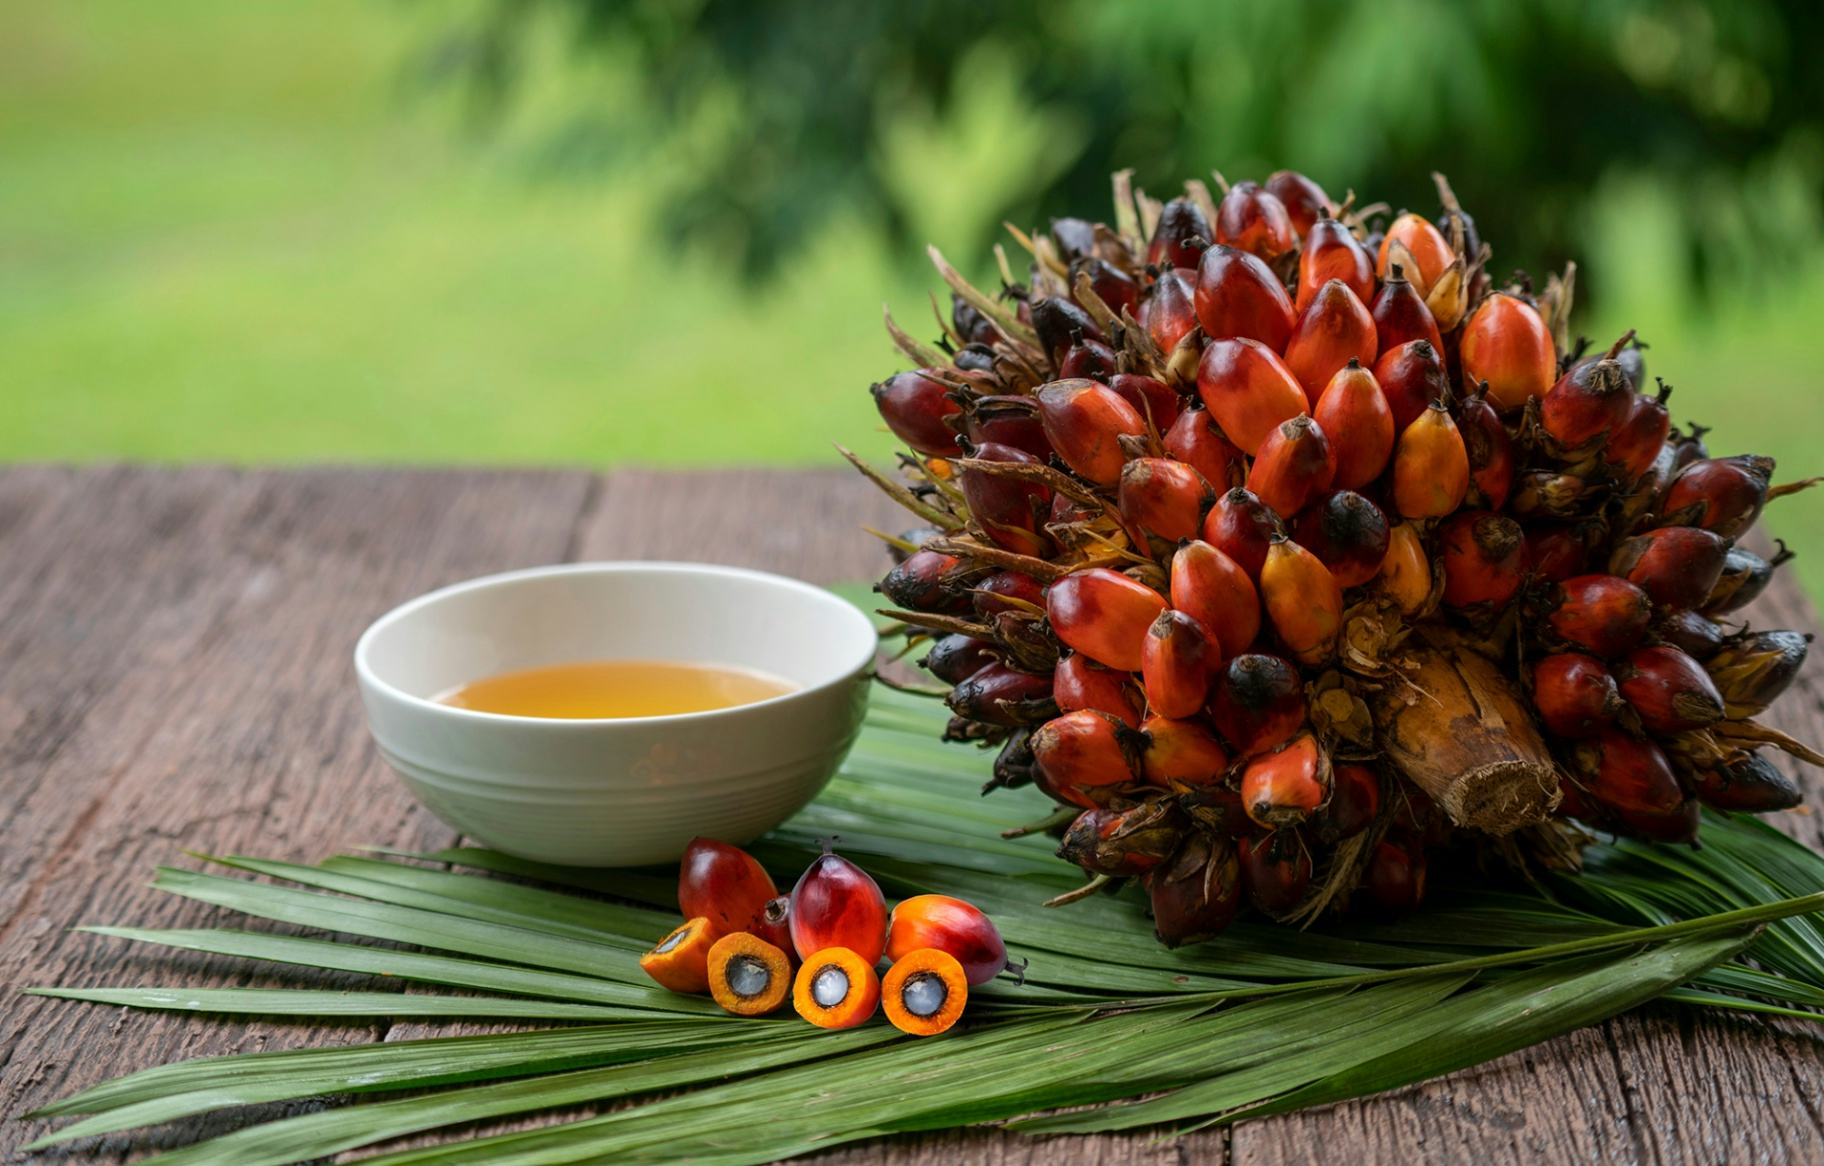 Oiling the ‘palm’: The pros and cons of SL’s palm oil industry